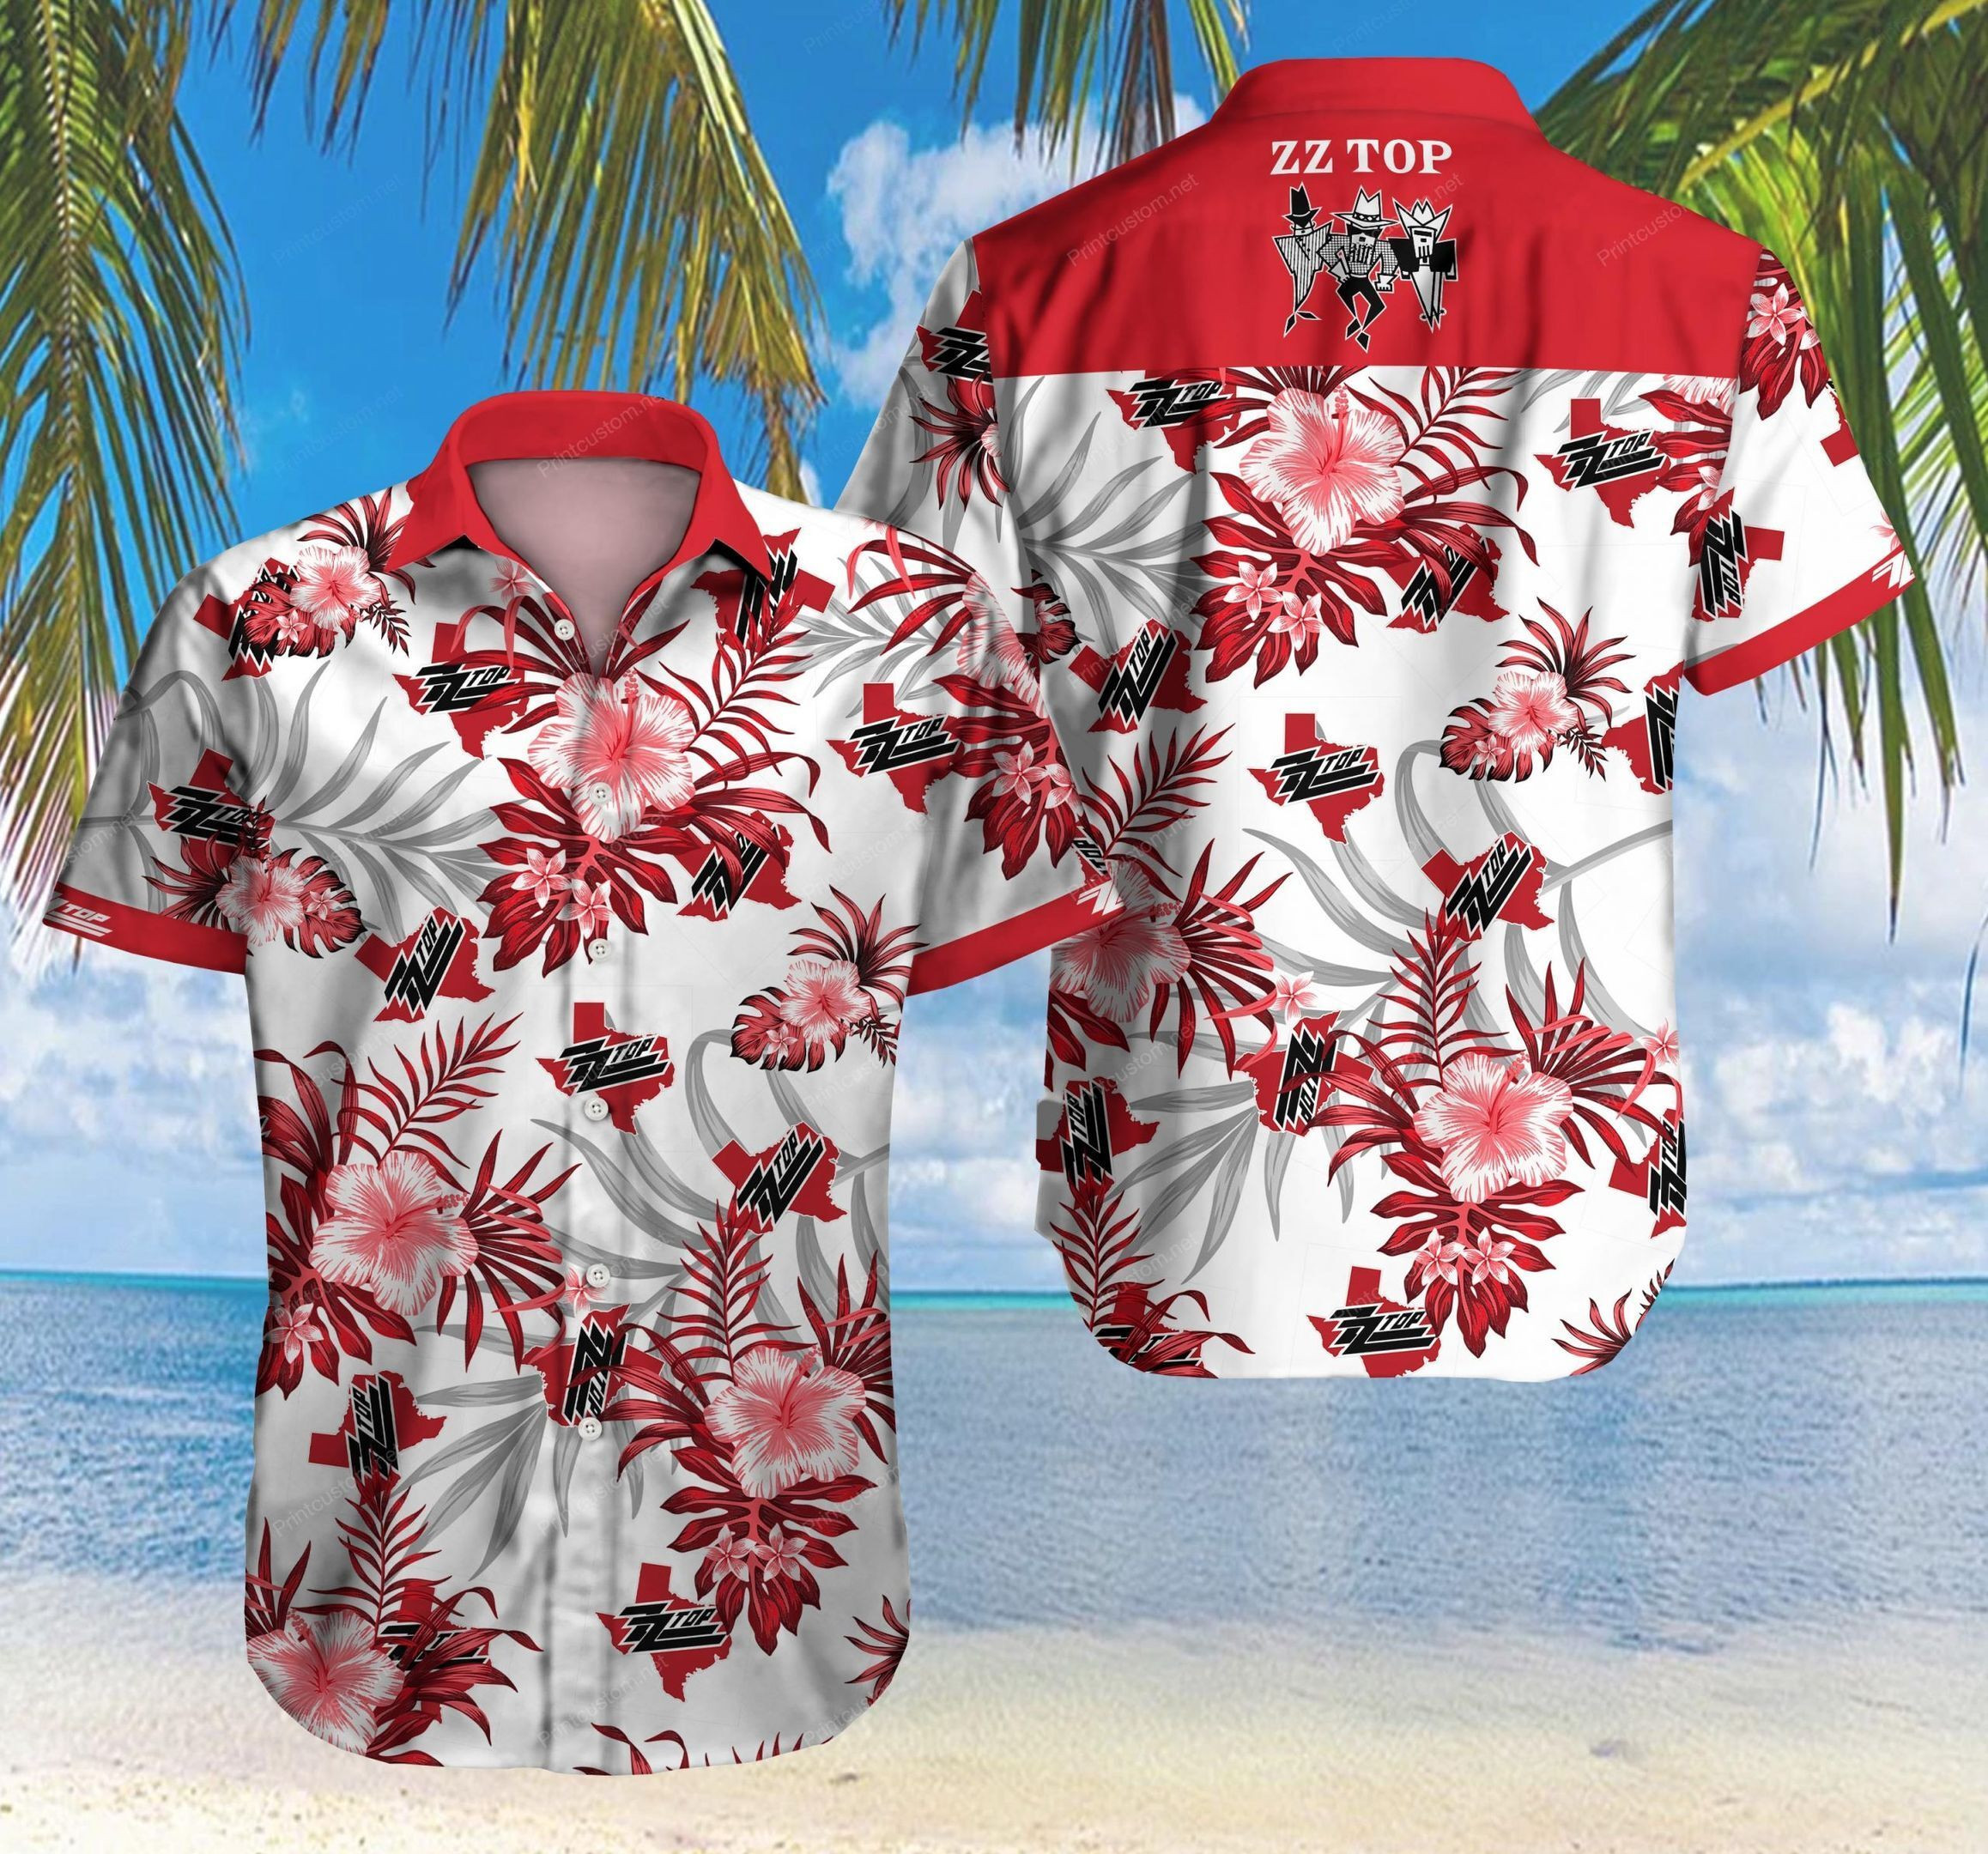 This style of Hawaiian shirt is great for the beach 443